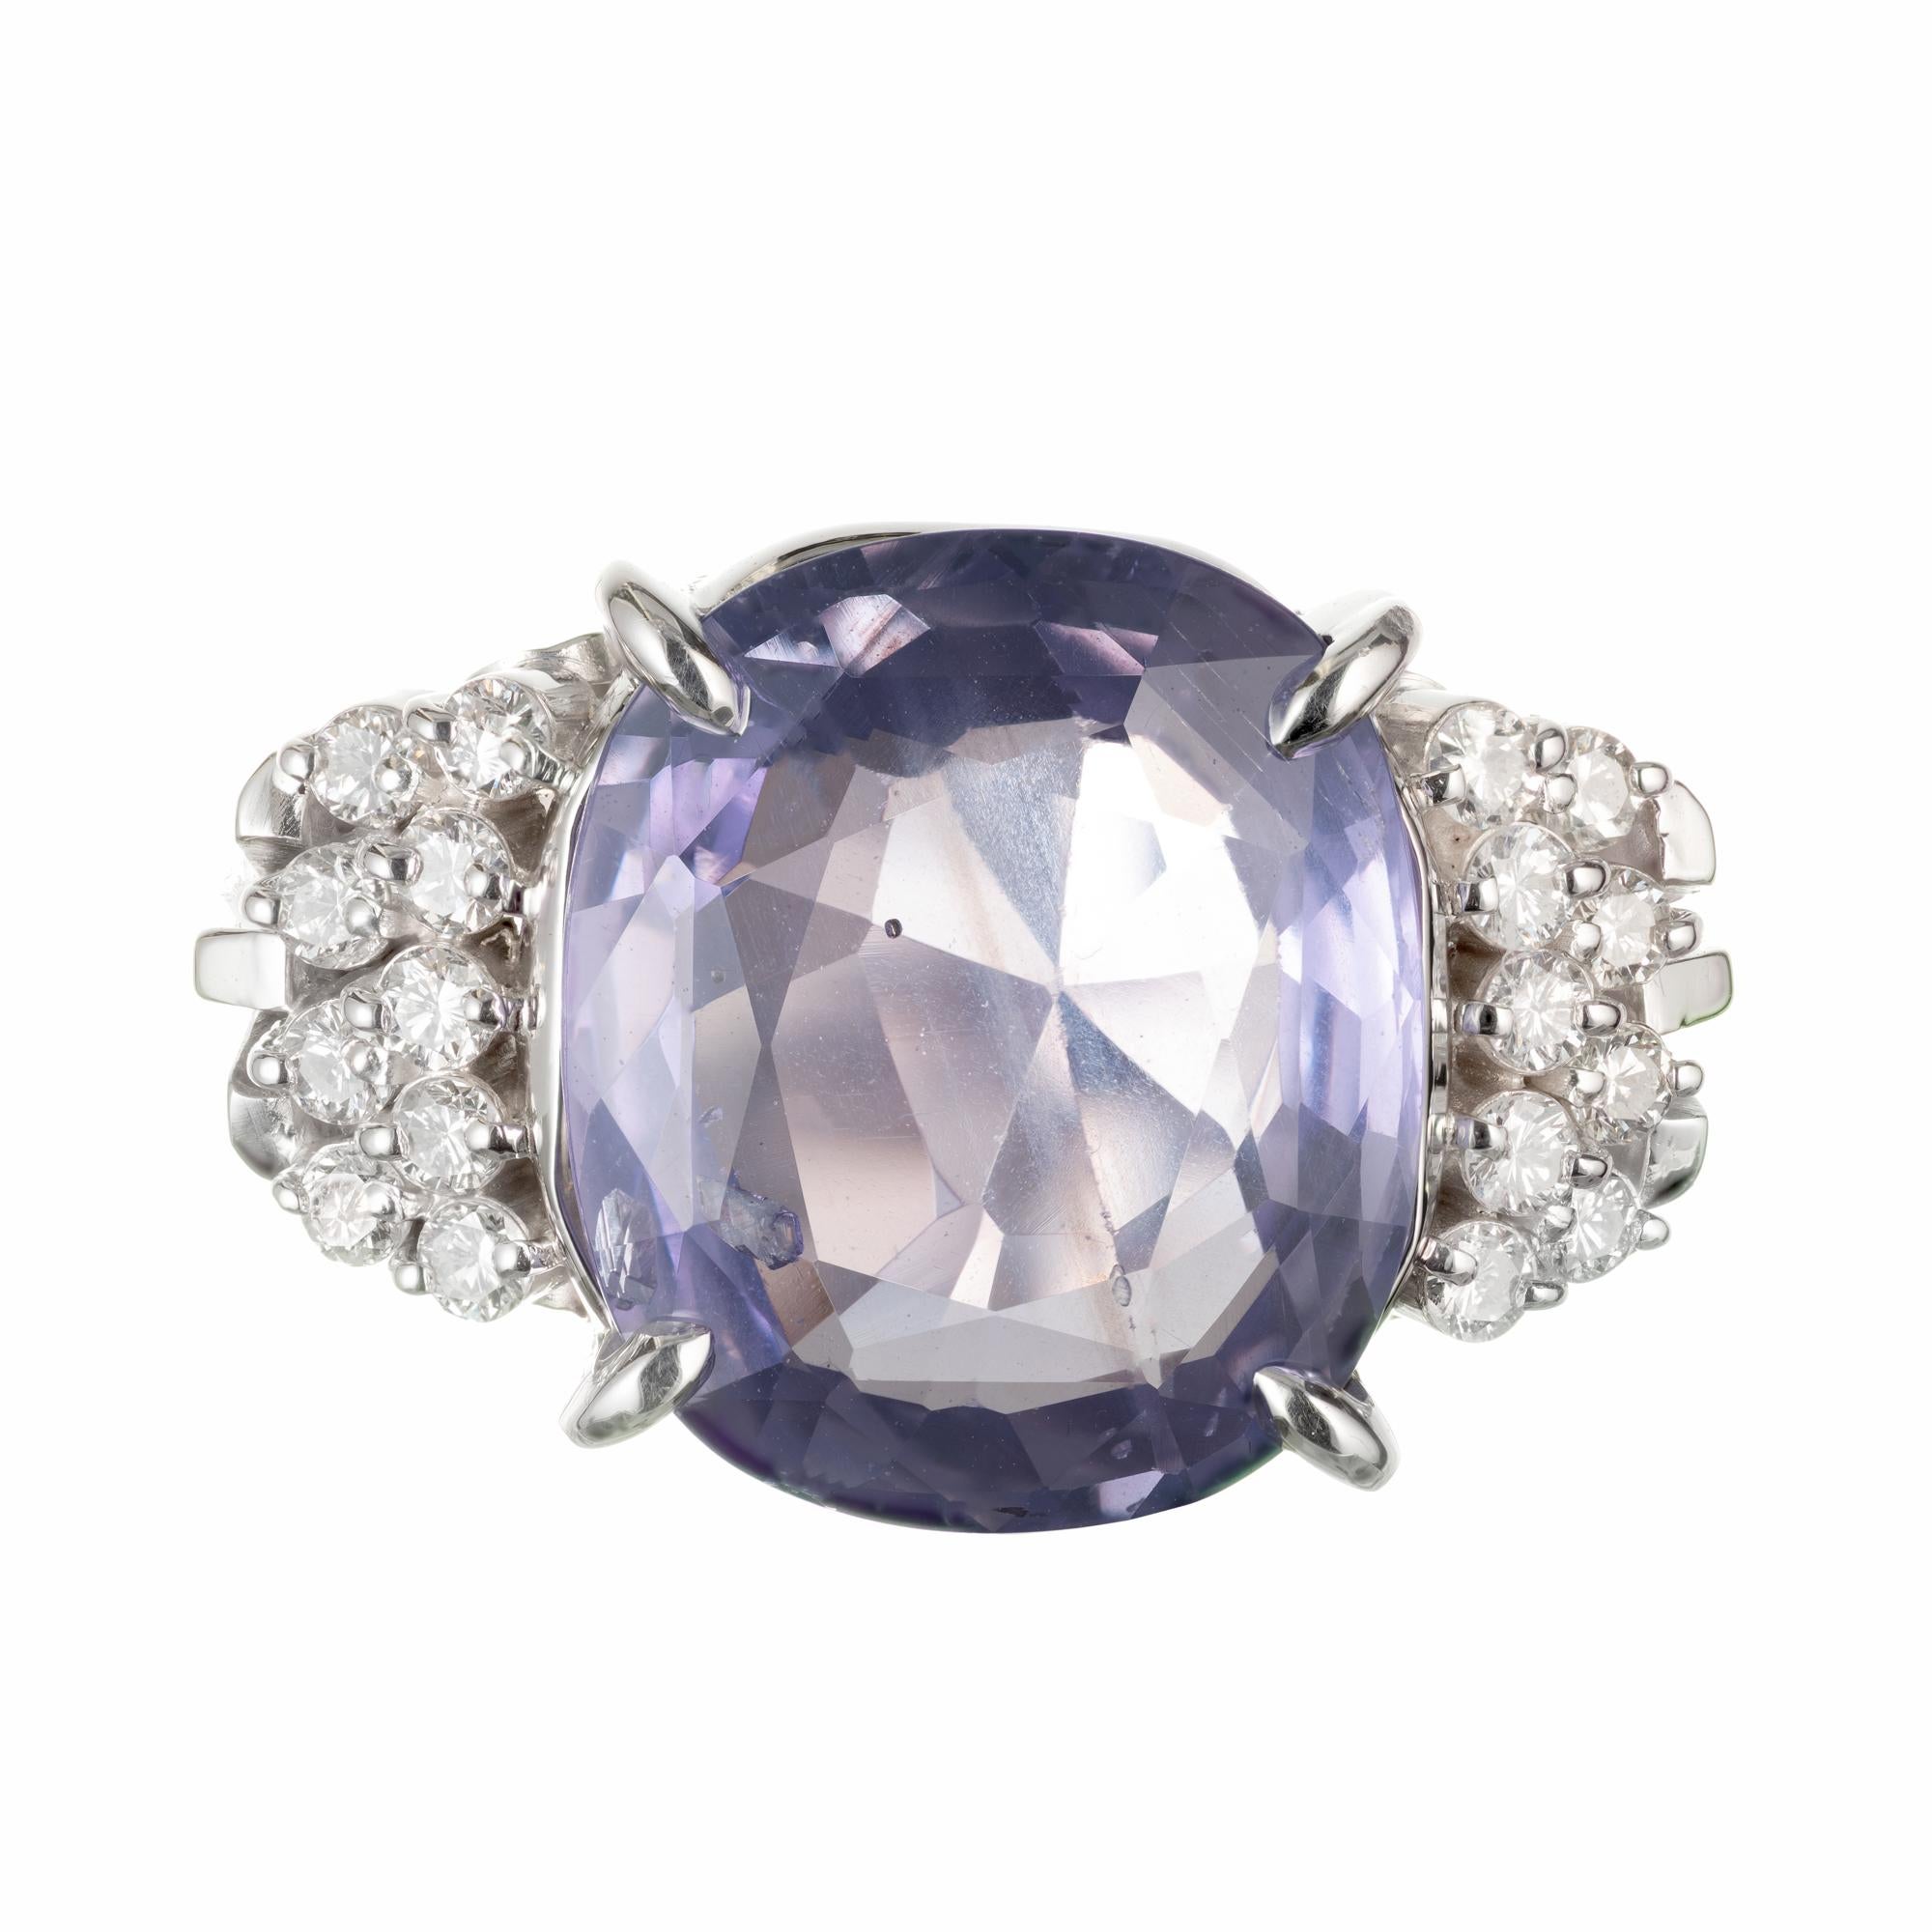 Light violet purple color change sapphire and diamond engagement ring. GIA certified center cushion cut sapphire center stone with round brilliant cut accent diamonda in its original platinum setting circa 1950-1960. GIA Certified natural no heat no